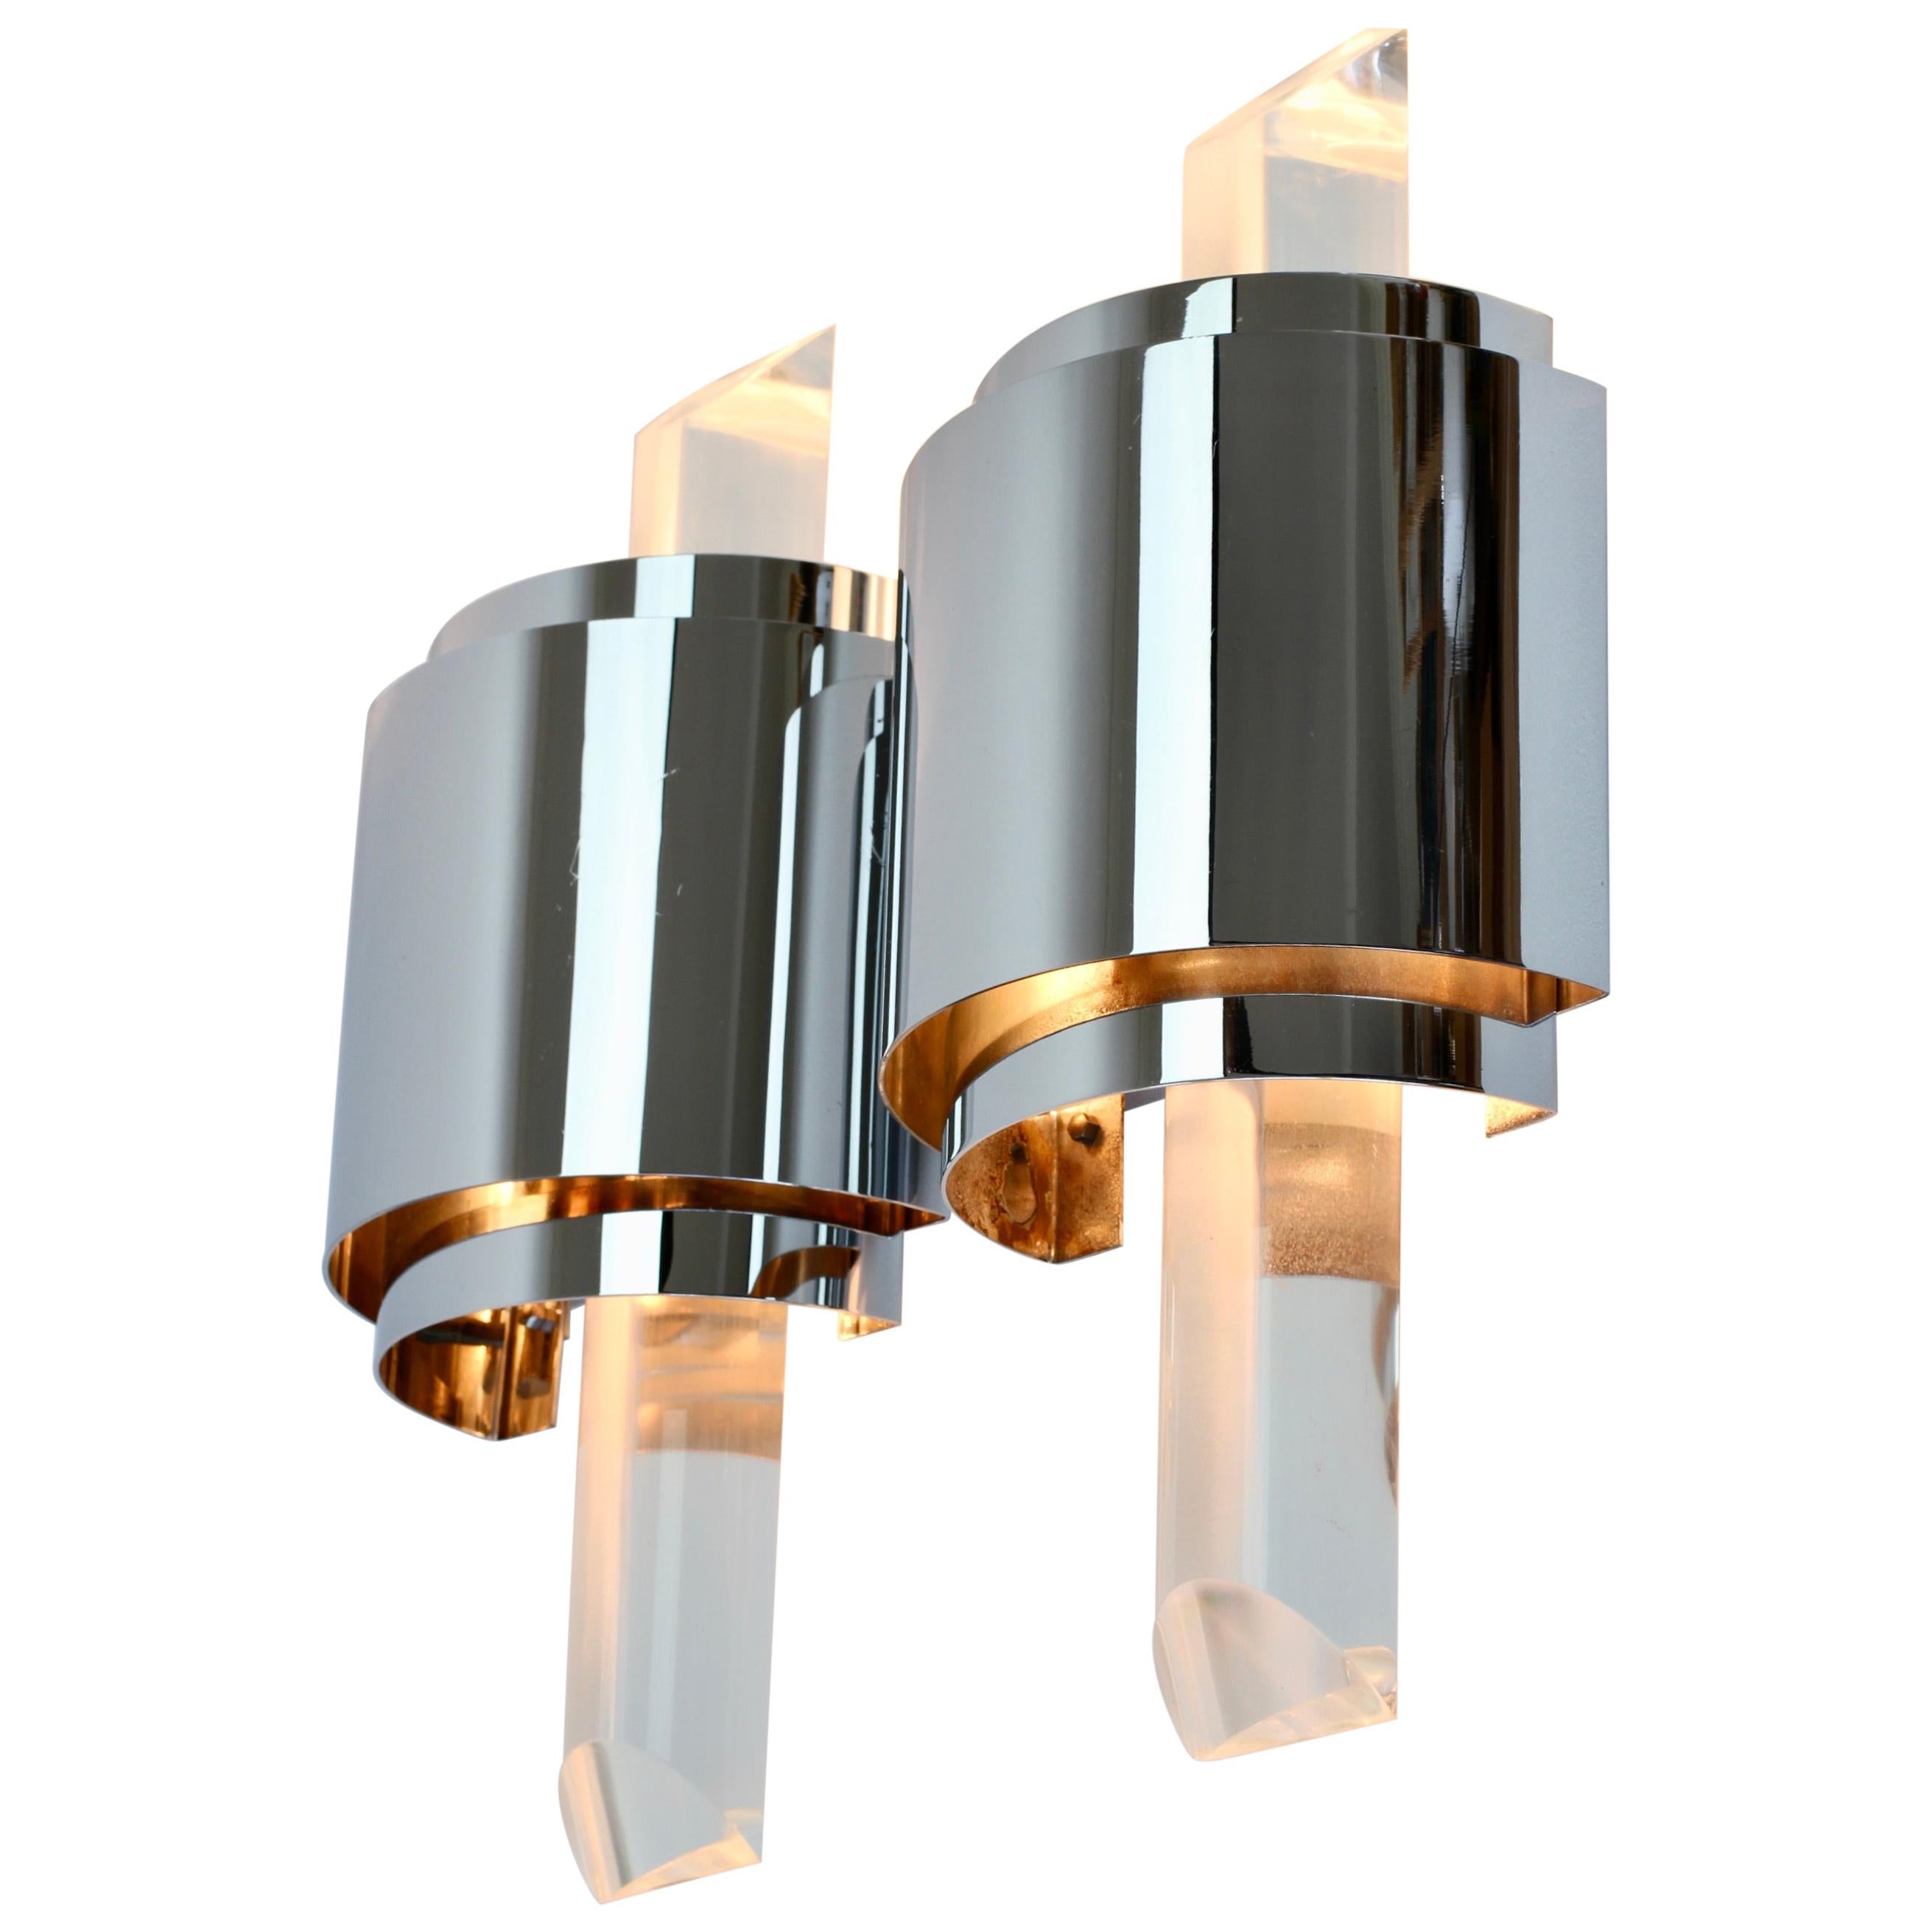 1 of 4 Large Vintage Hollywood Regency Lucite and Chrome Wall Lights or Sconces